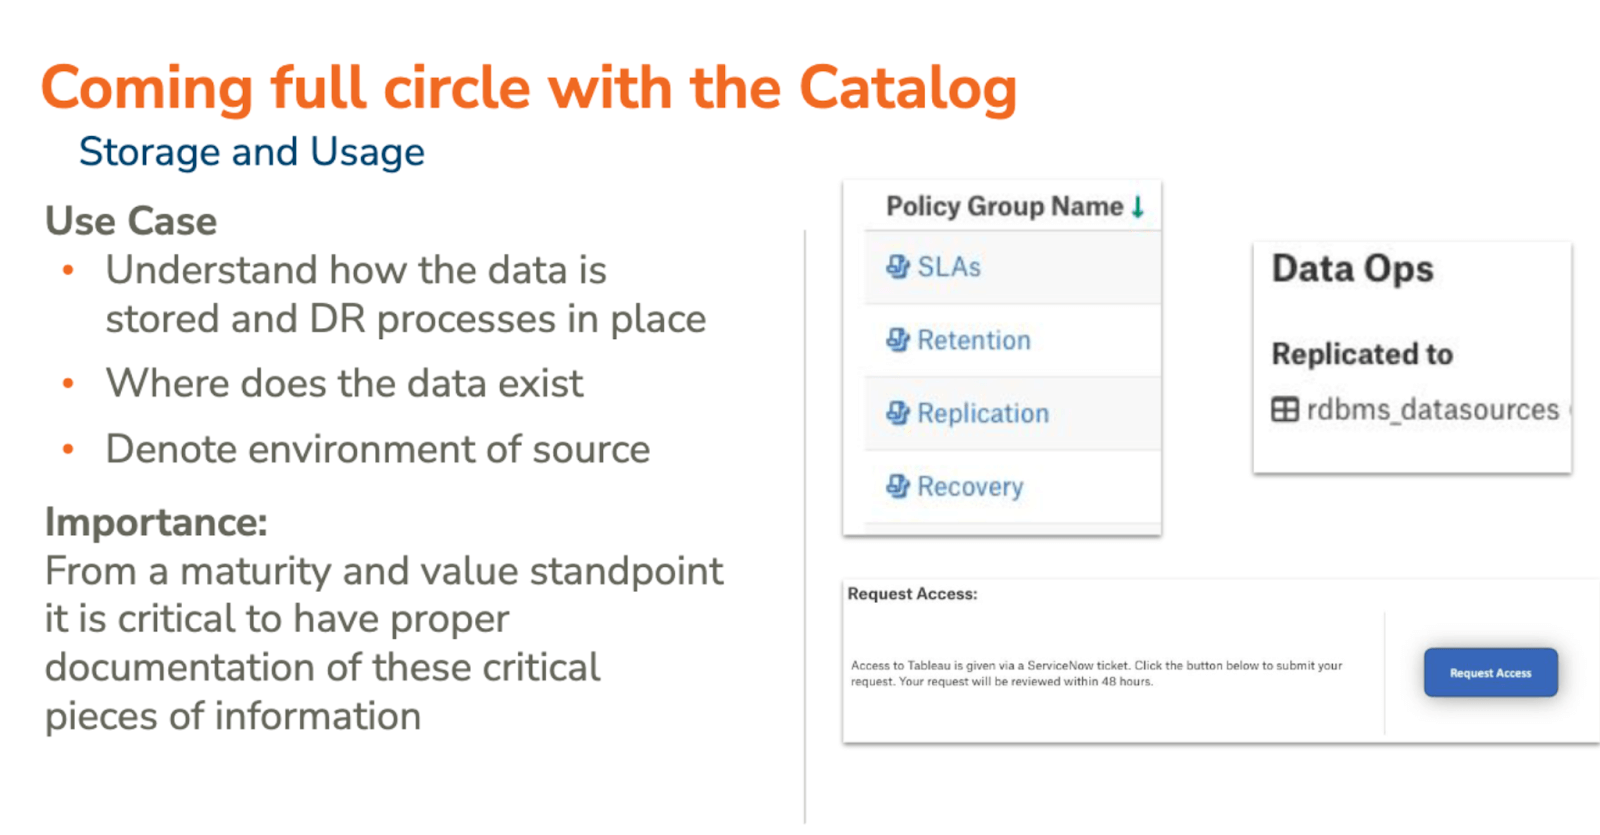 Image showing how data storage and usage is documented in the data catalog.